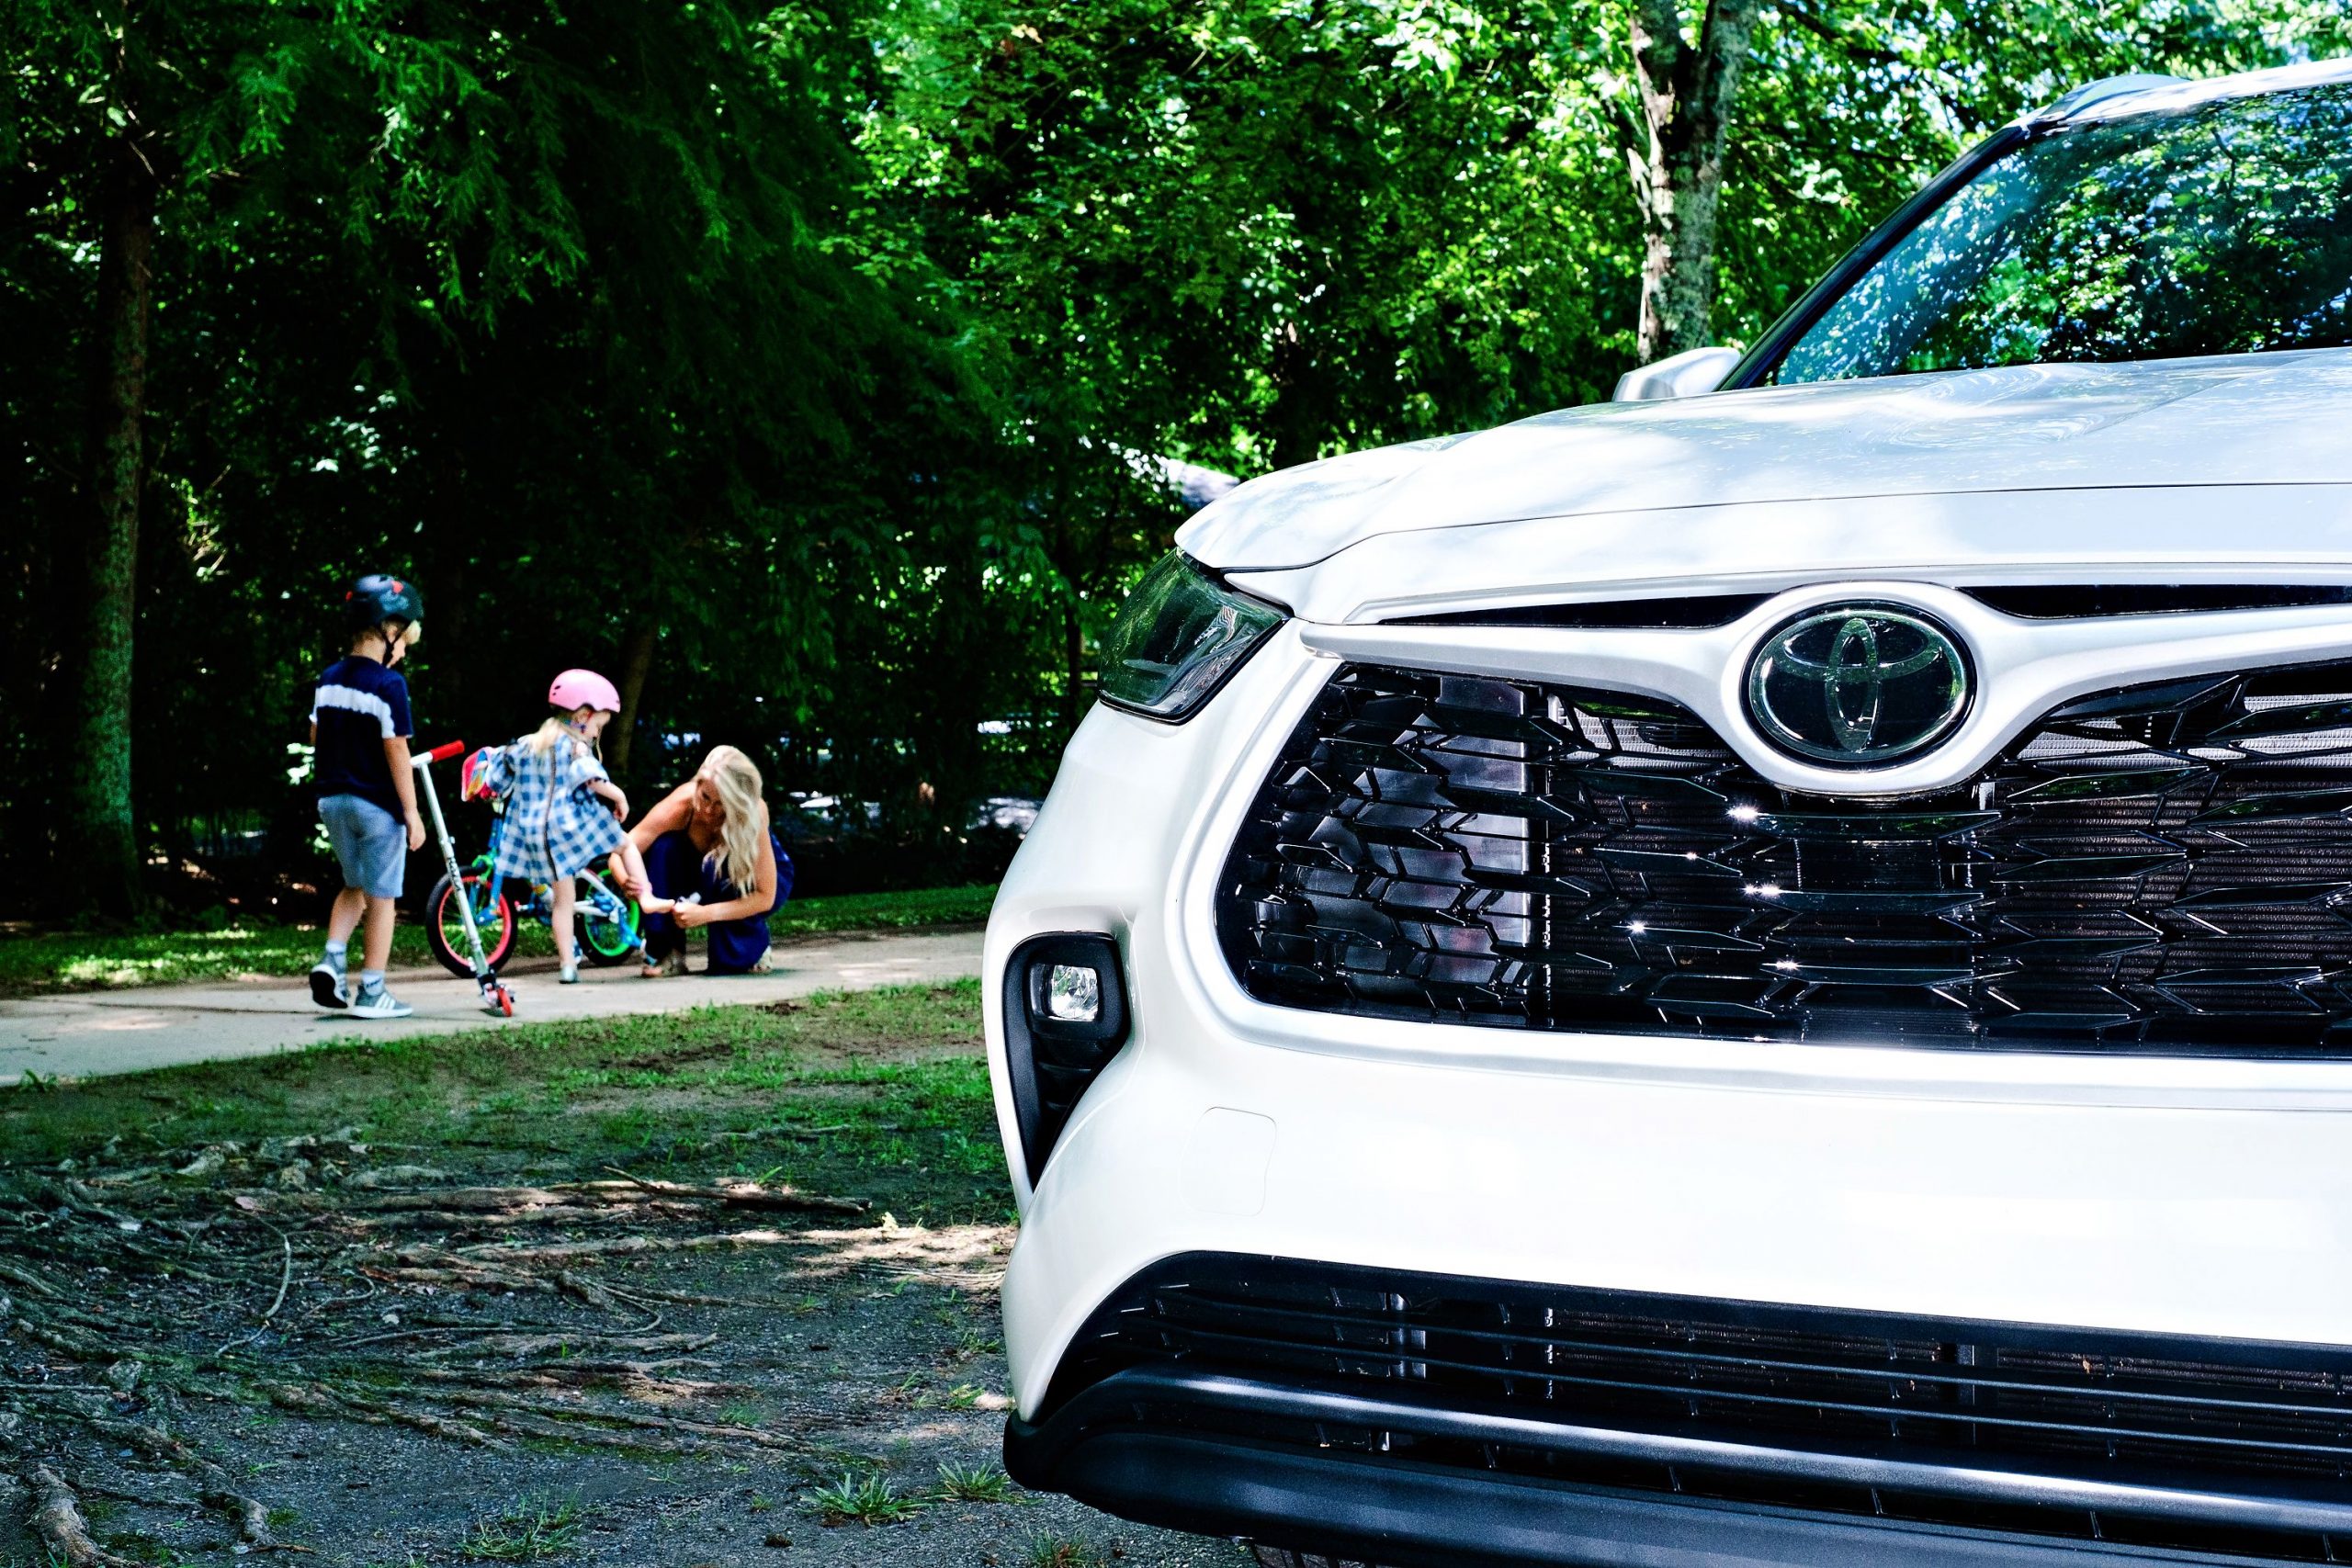 Looking into a Toyota Highlander? Popular Atlanta Blogger Happily Hughes is sharing her Toyota Highlander review! Click to see it HERE!